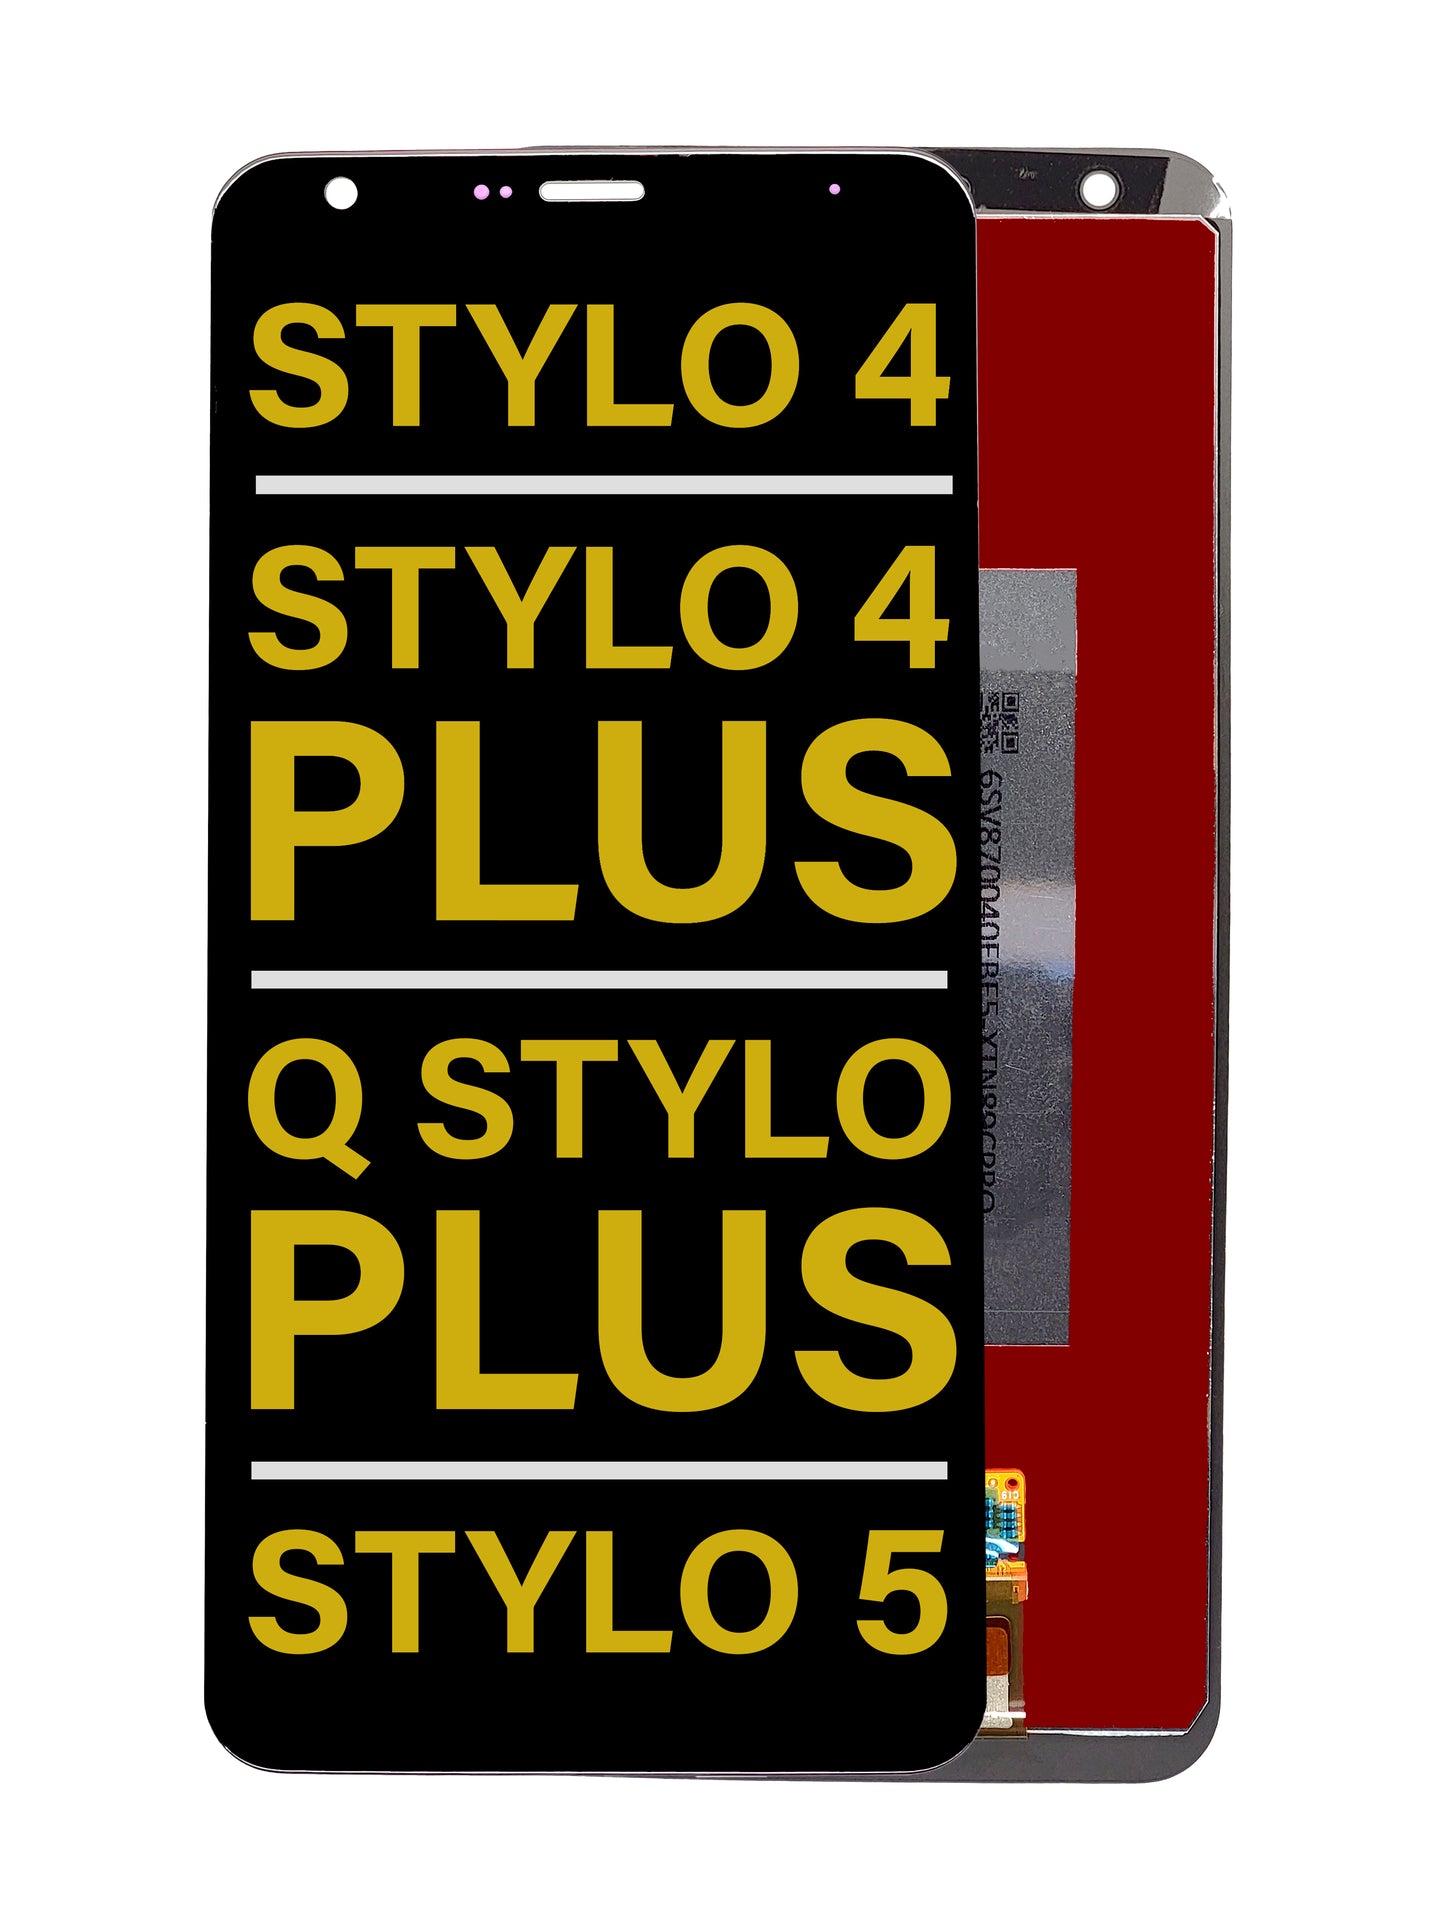 LGQ Stylo 4 / Stylo 4 Plus / Q Stylo Plus / Stylo 5 Screen Assembly (Without The Frame) (Refurbished) (Black)